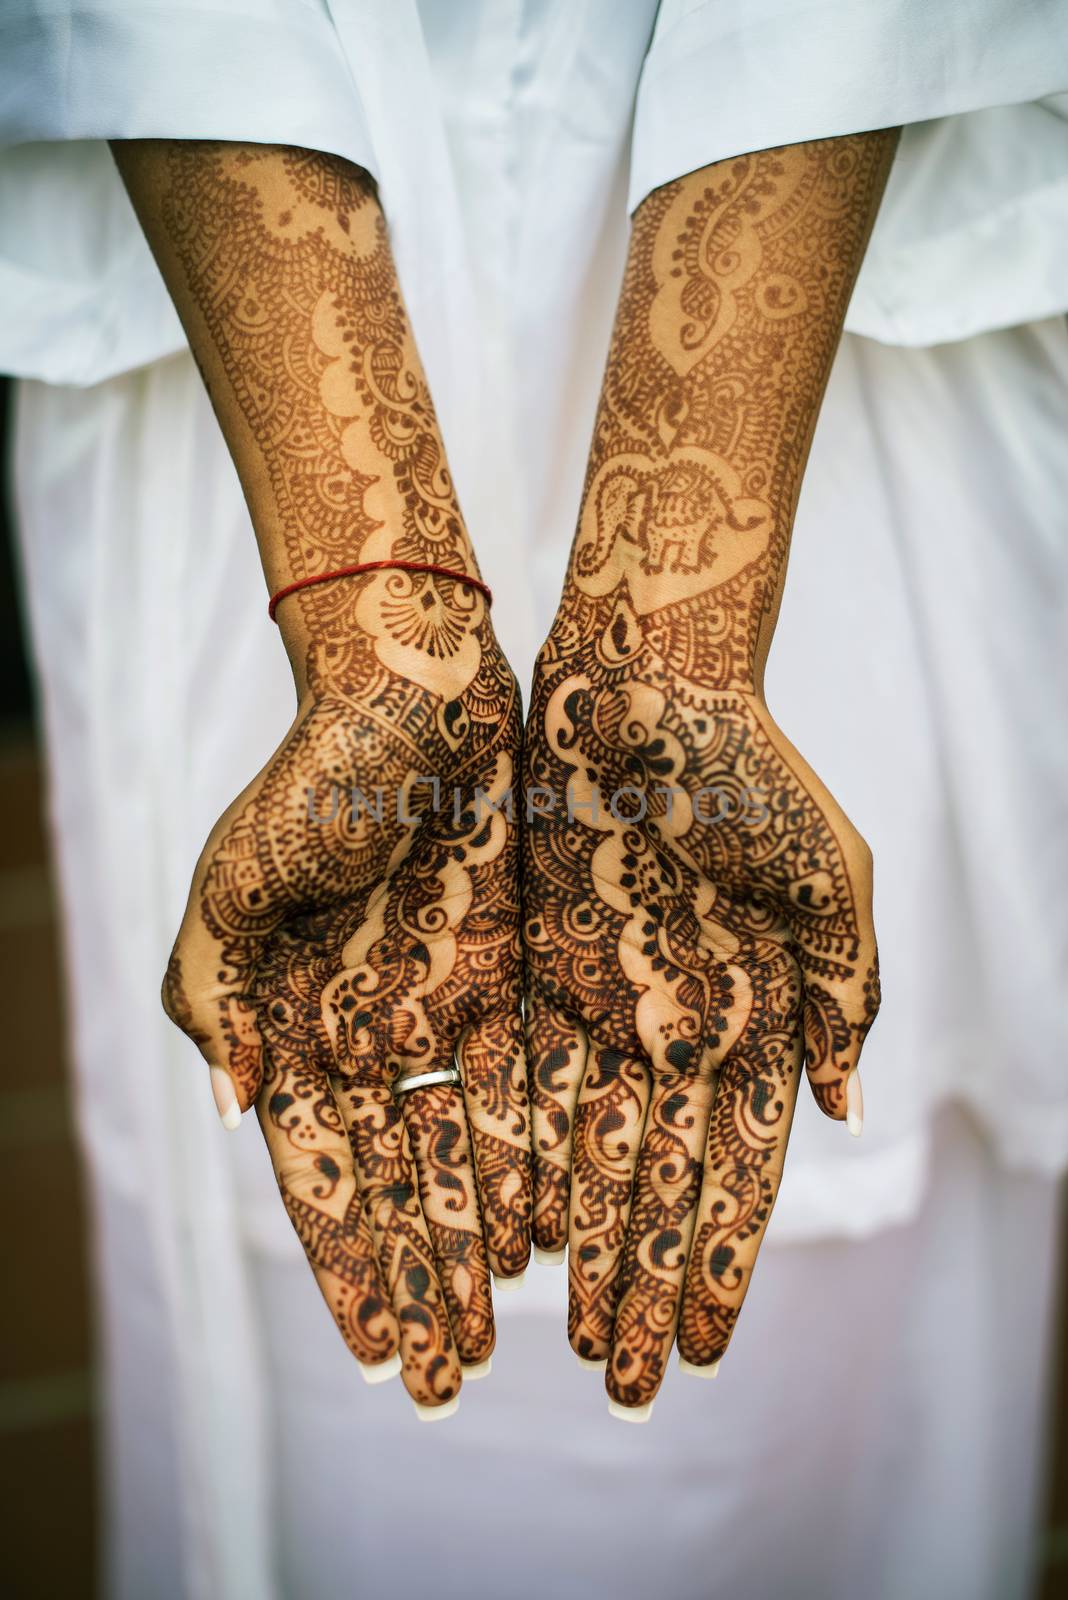  Henna Tattoos on Hands by gregory21